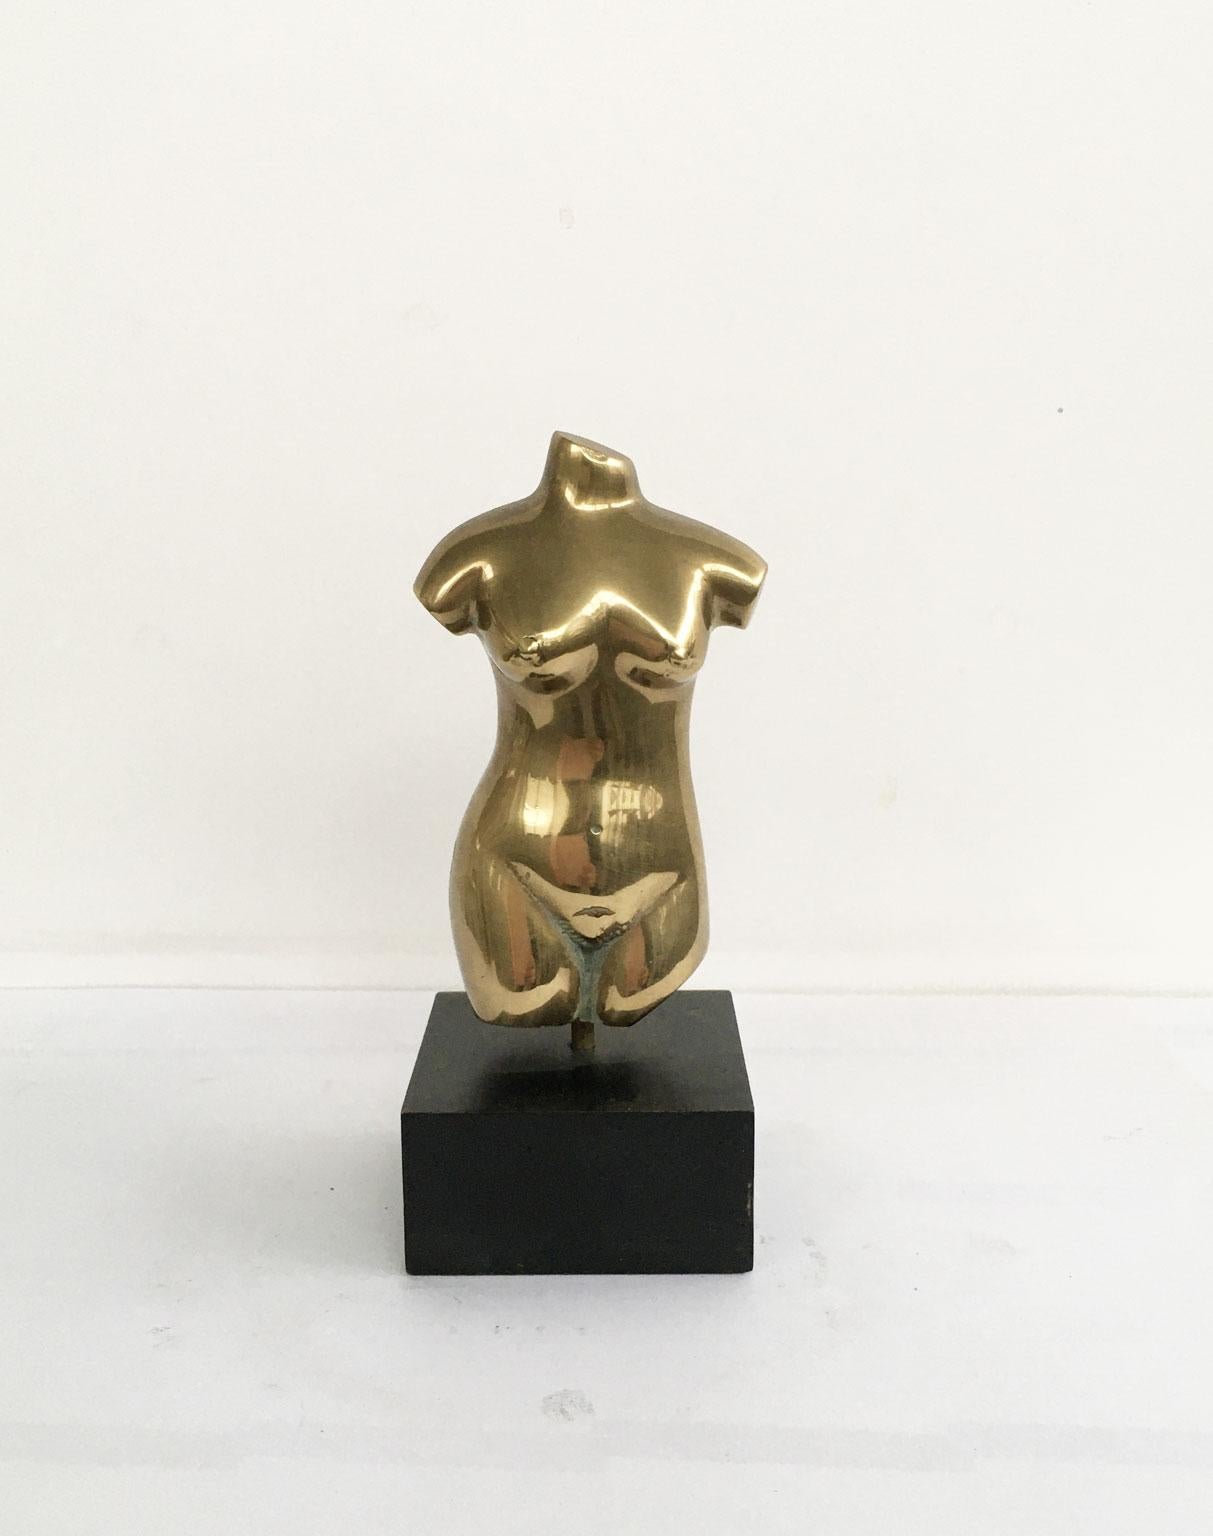 This engaging bronze artwork was created by the Italian artist Cristiana Isoleri. This is a multiple of 1.000 specimens, numbered and signed. The title is 